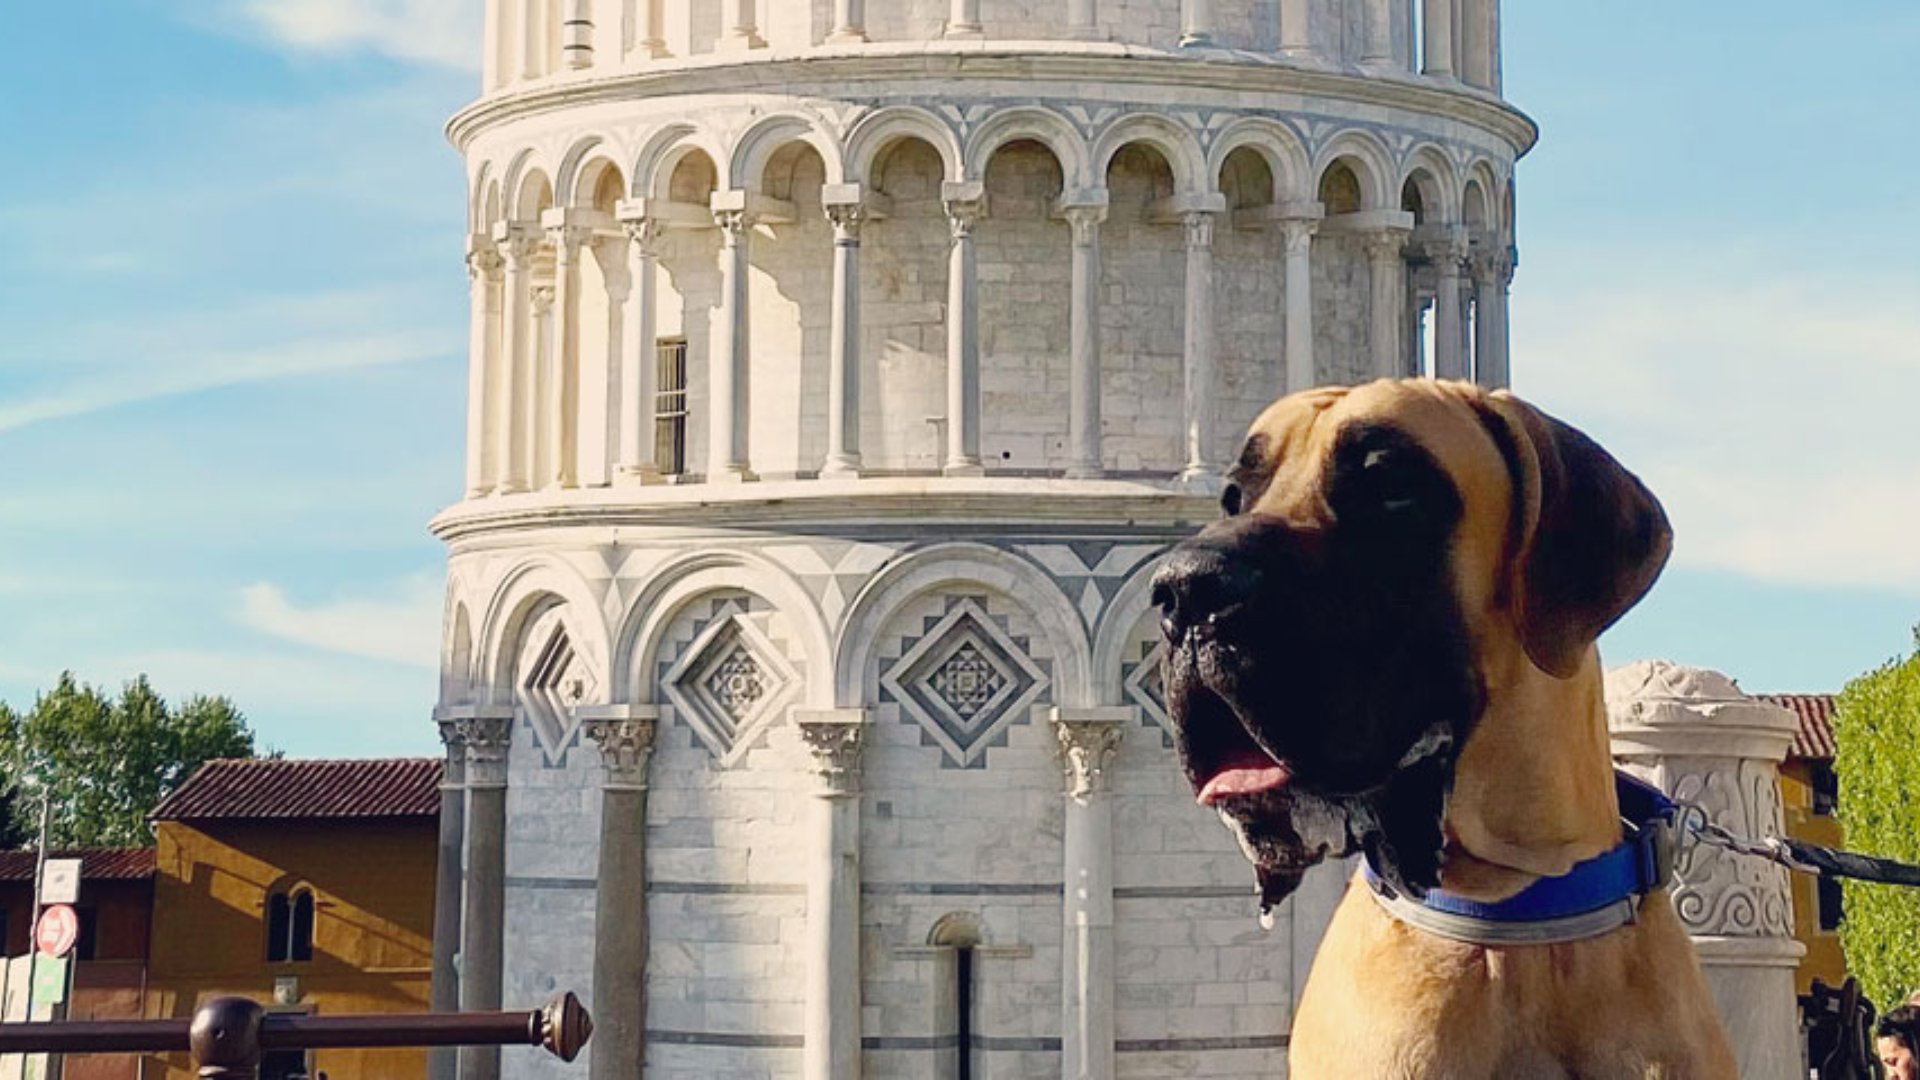 Leaning Tower of Pisa with a dog - Skip the line